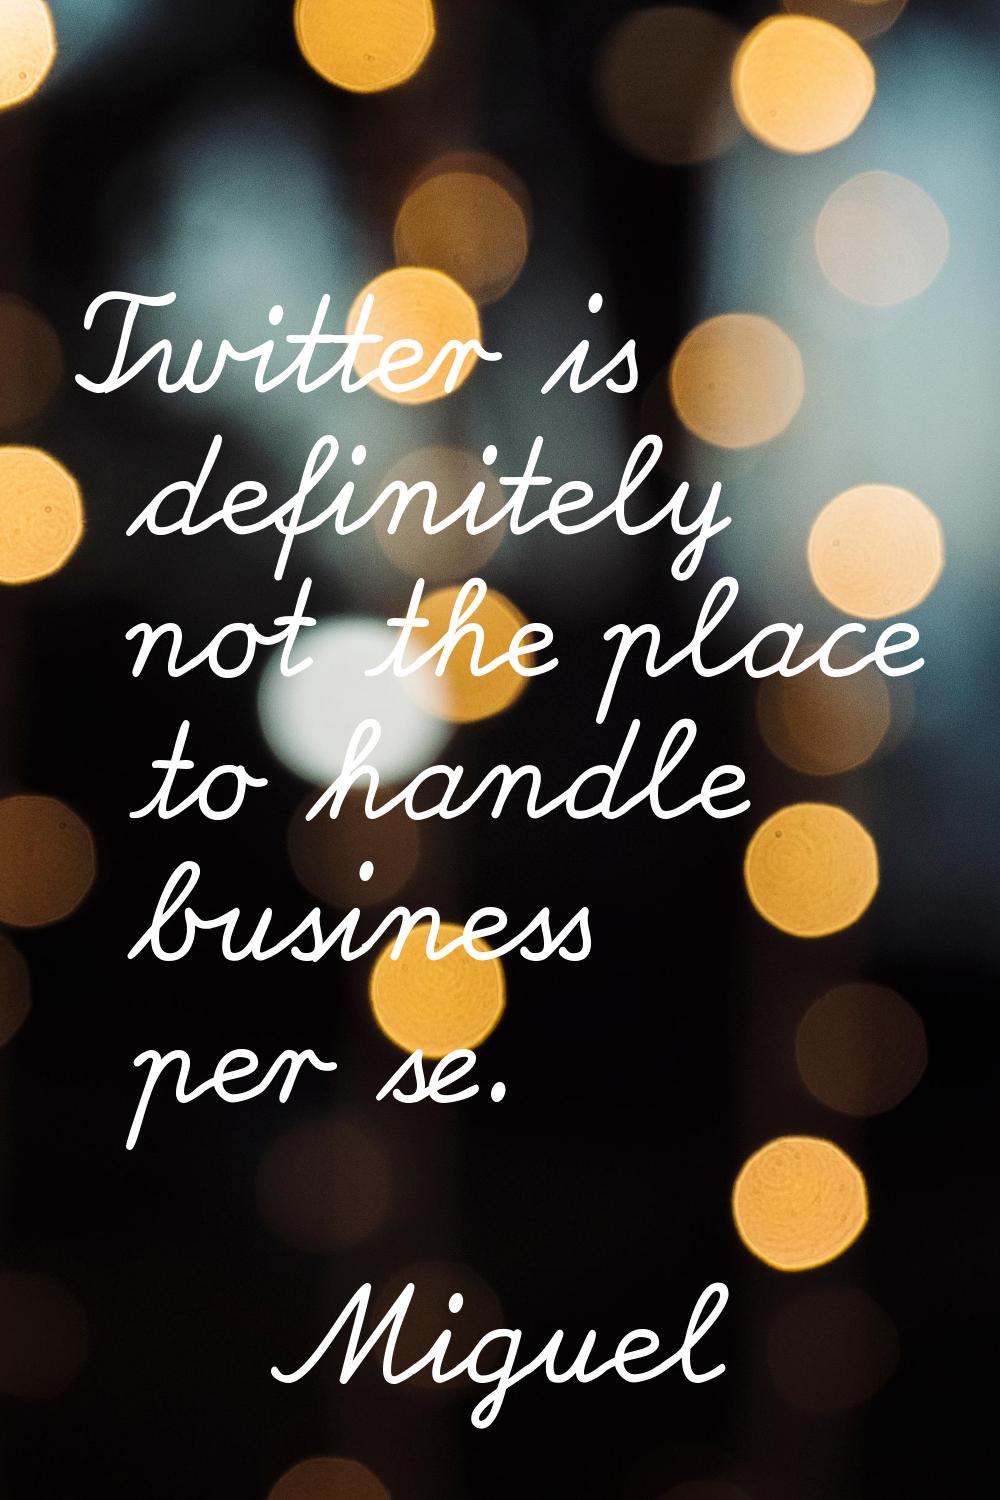 Twitter is definitely not the place to handle business per se.